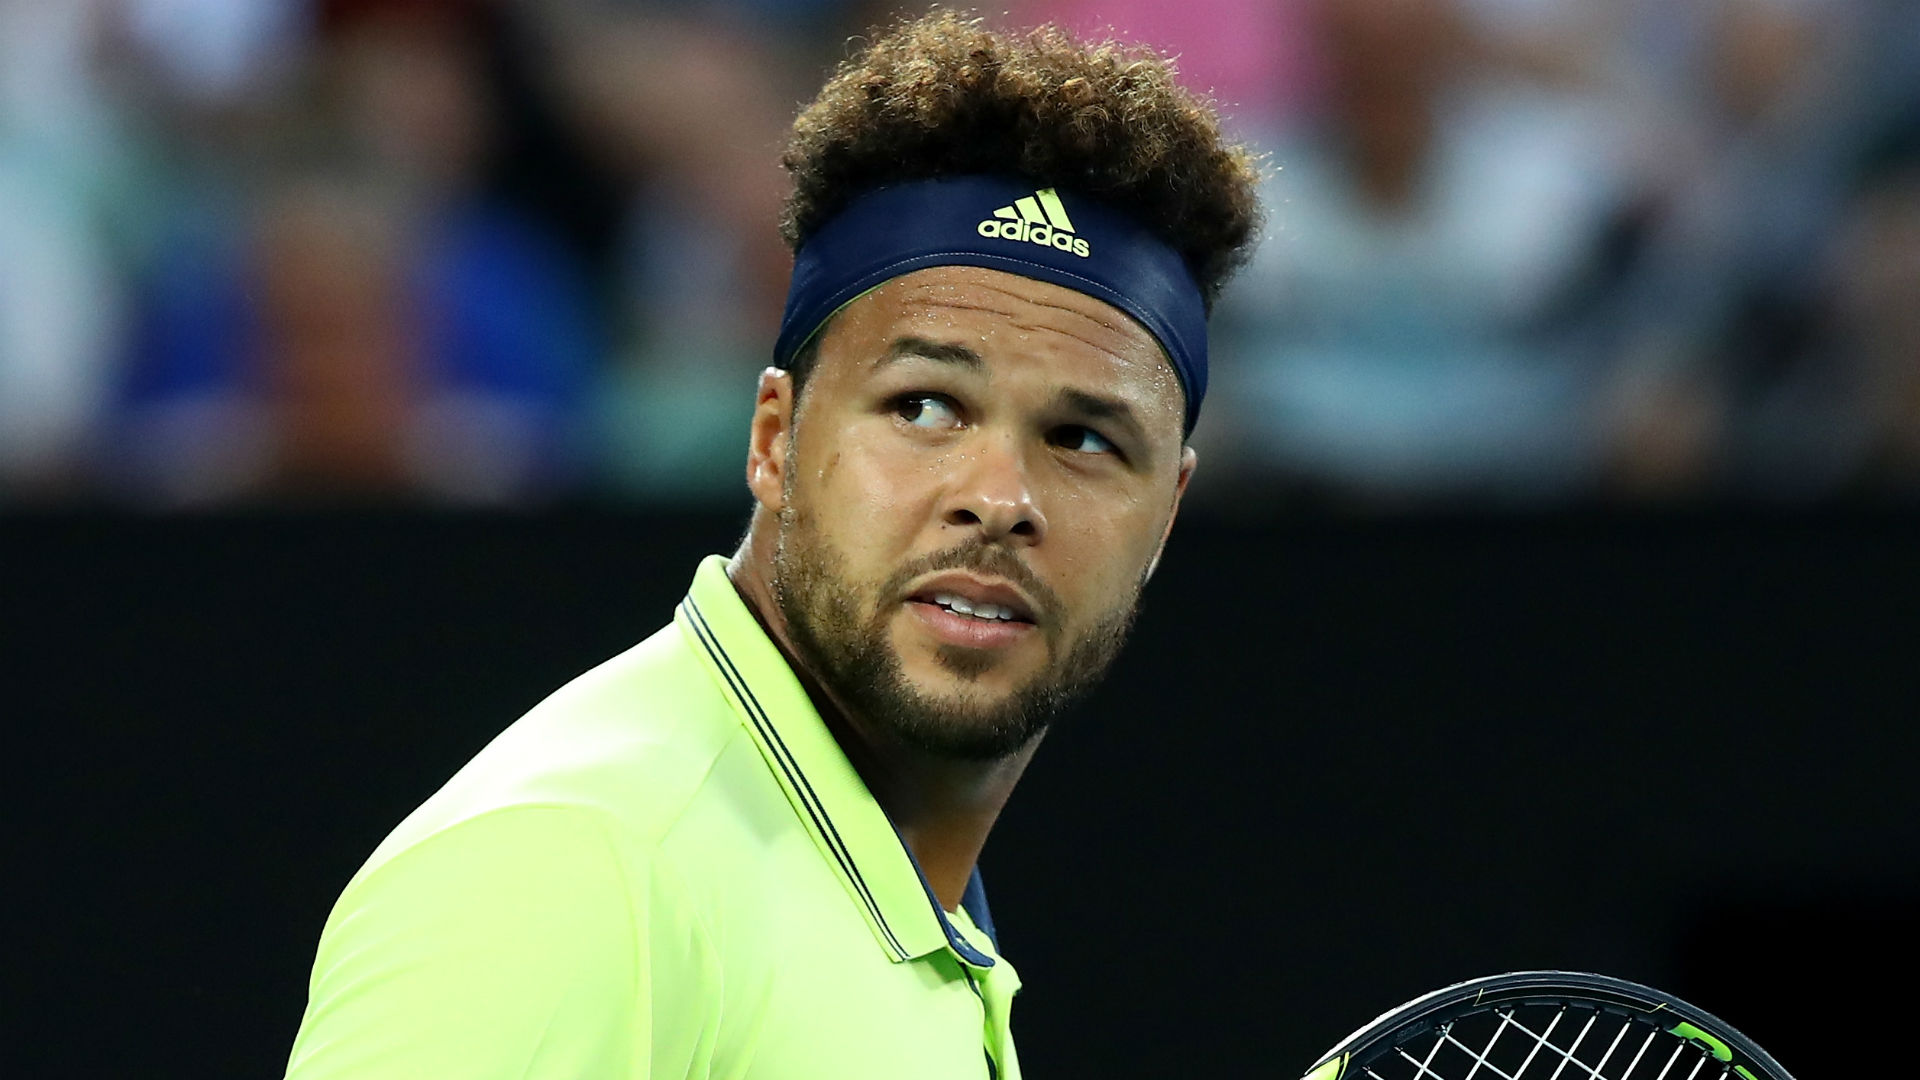 Playing at the Open 13 Marseille where he has enjoyed great success in the past, Jo-Wilfried Tsonga fell at the first hurdle.